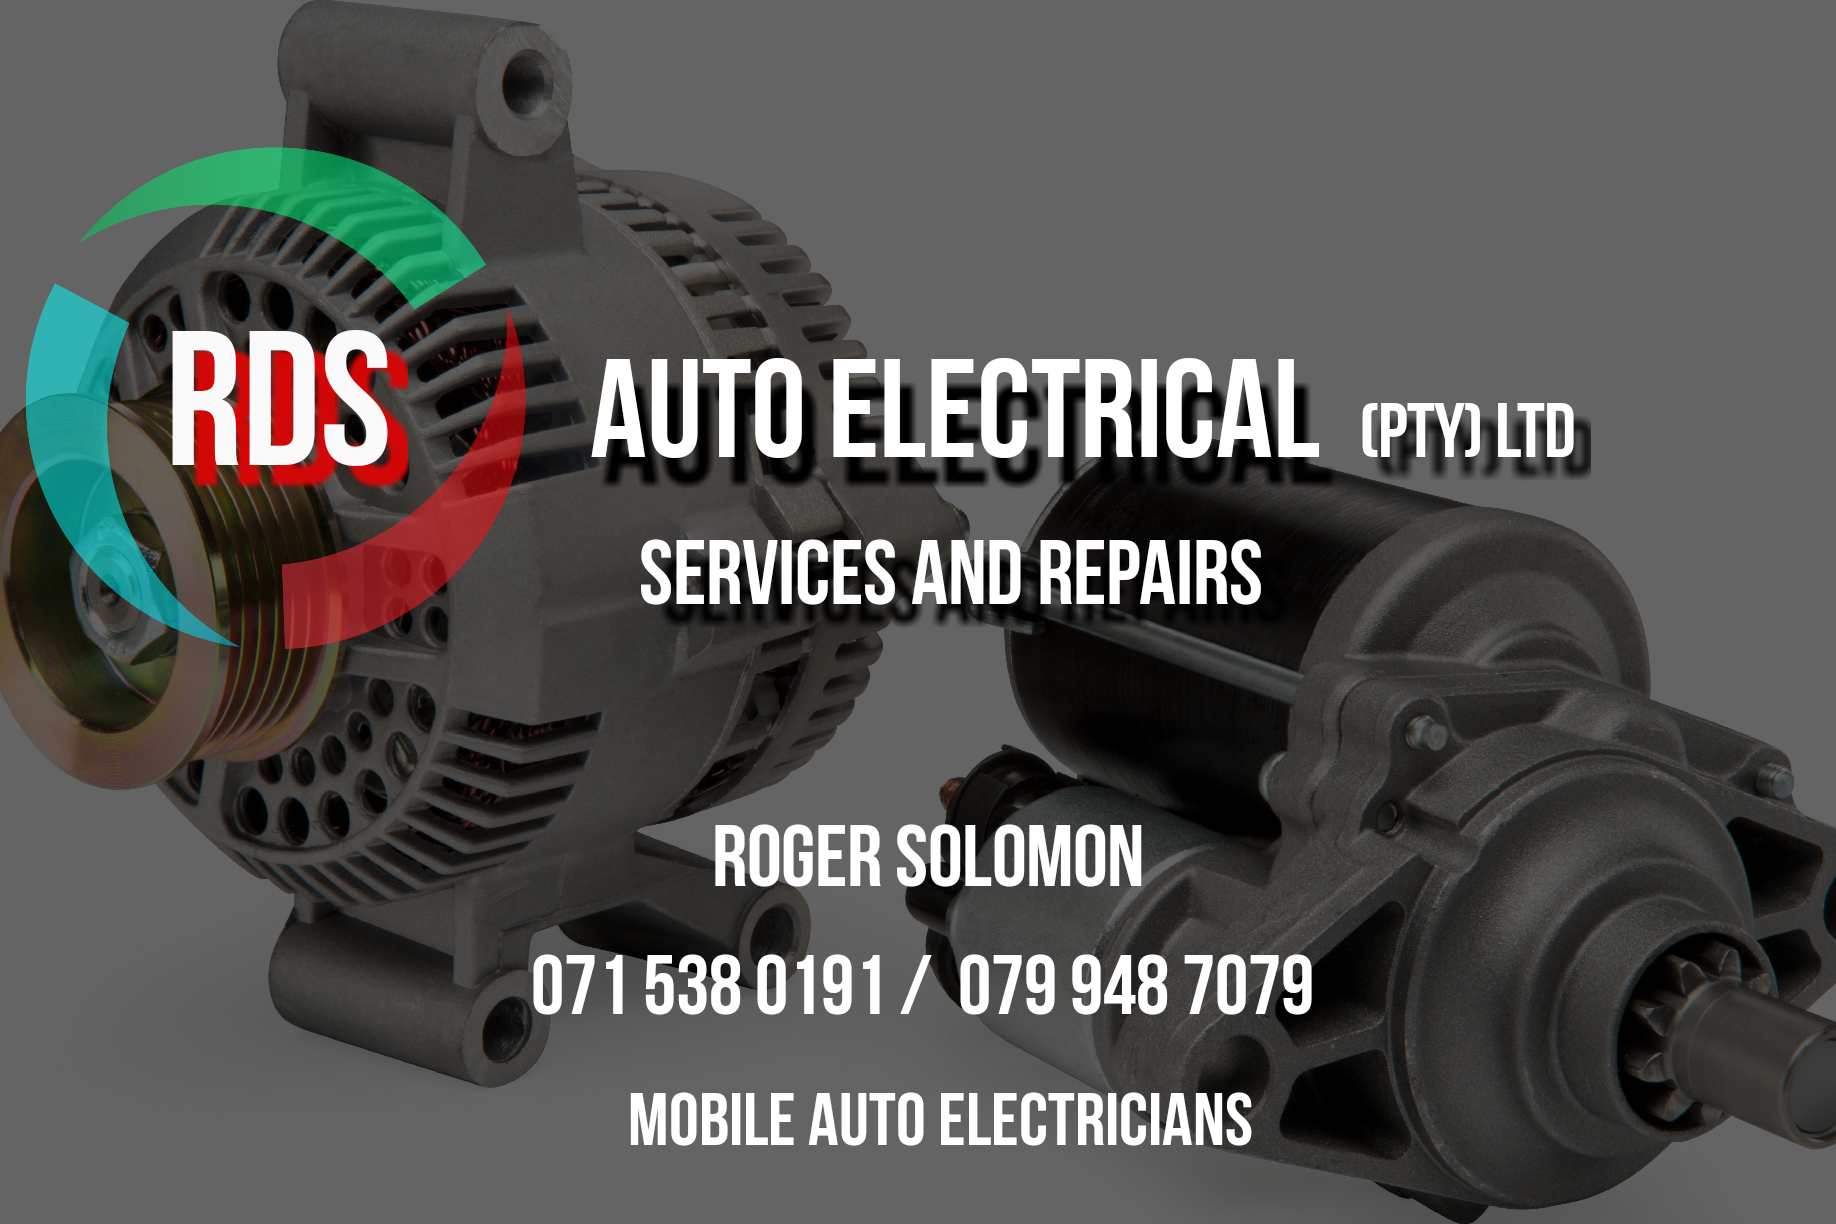 Mobile auto electrical services and repair 